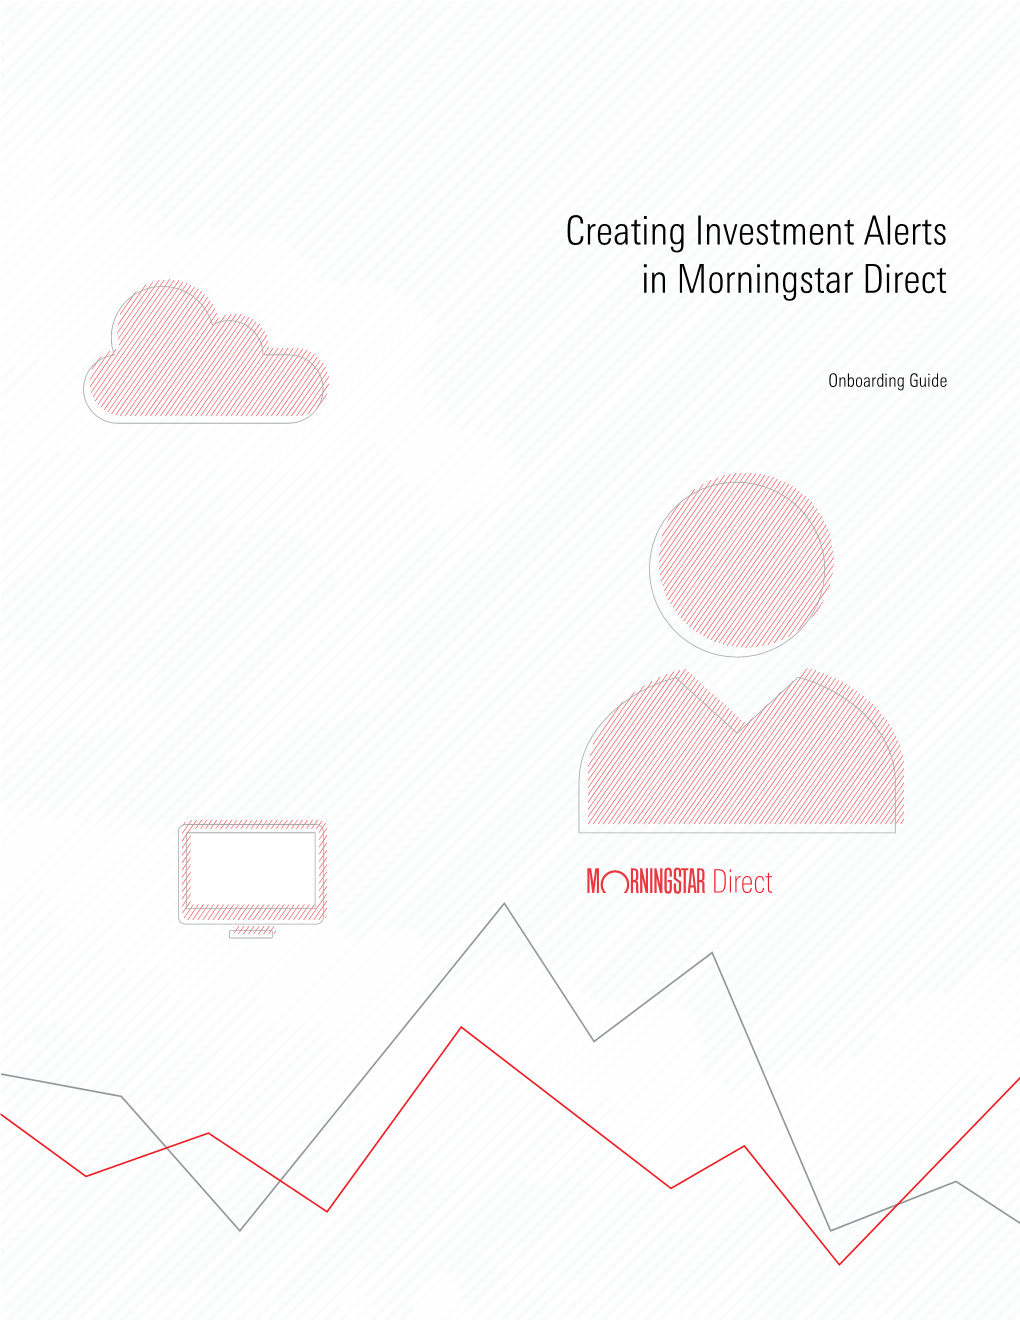 Creating Investment Alerts in Morningstar Direct